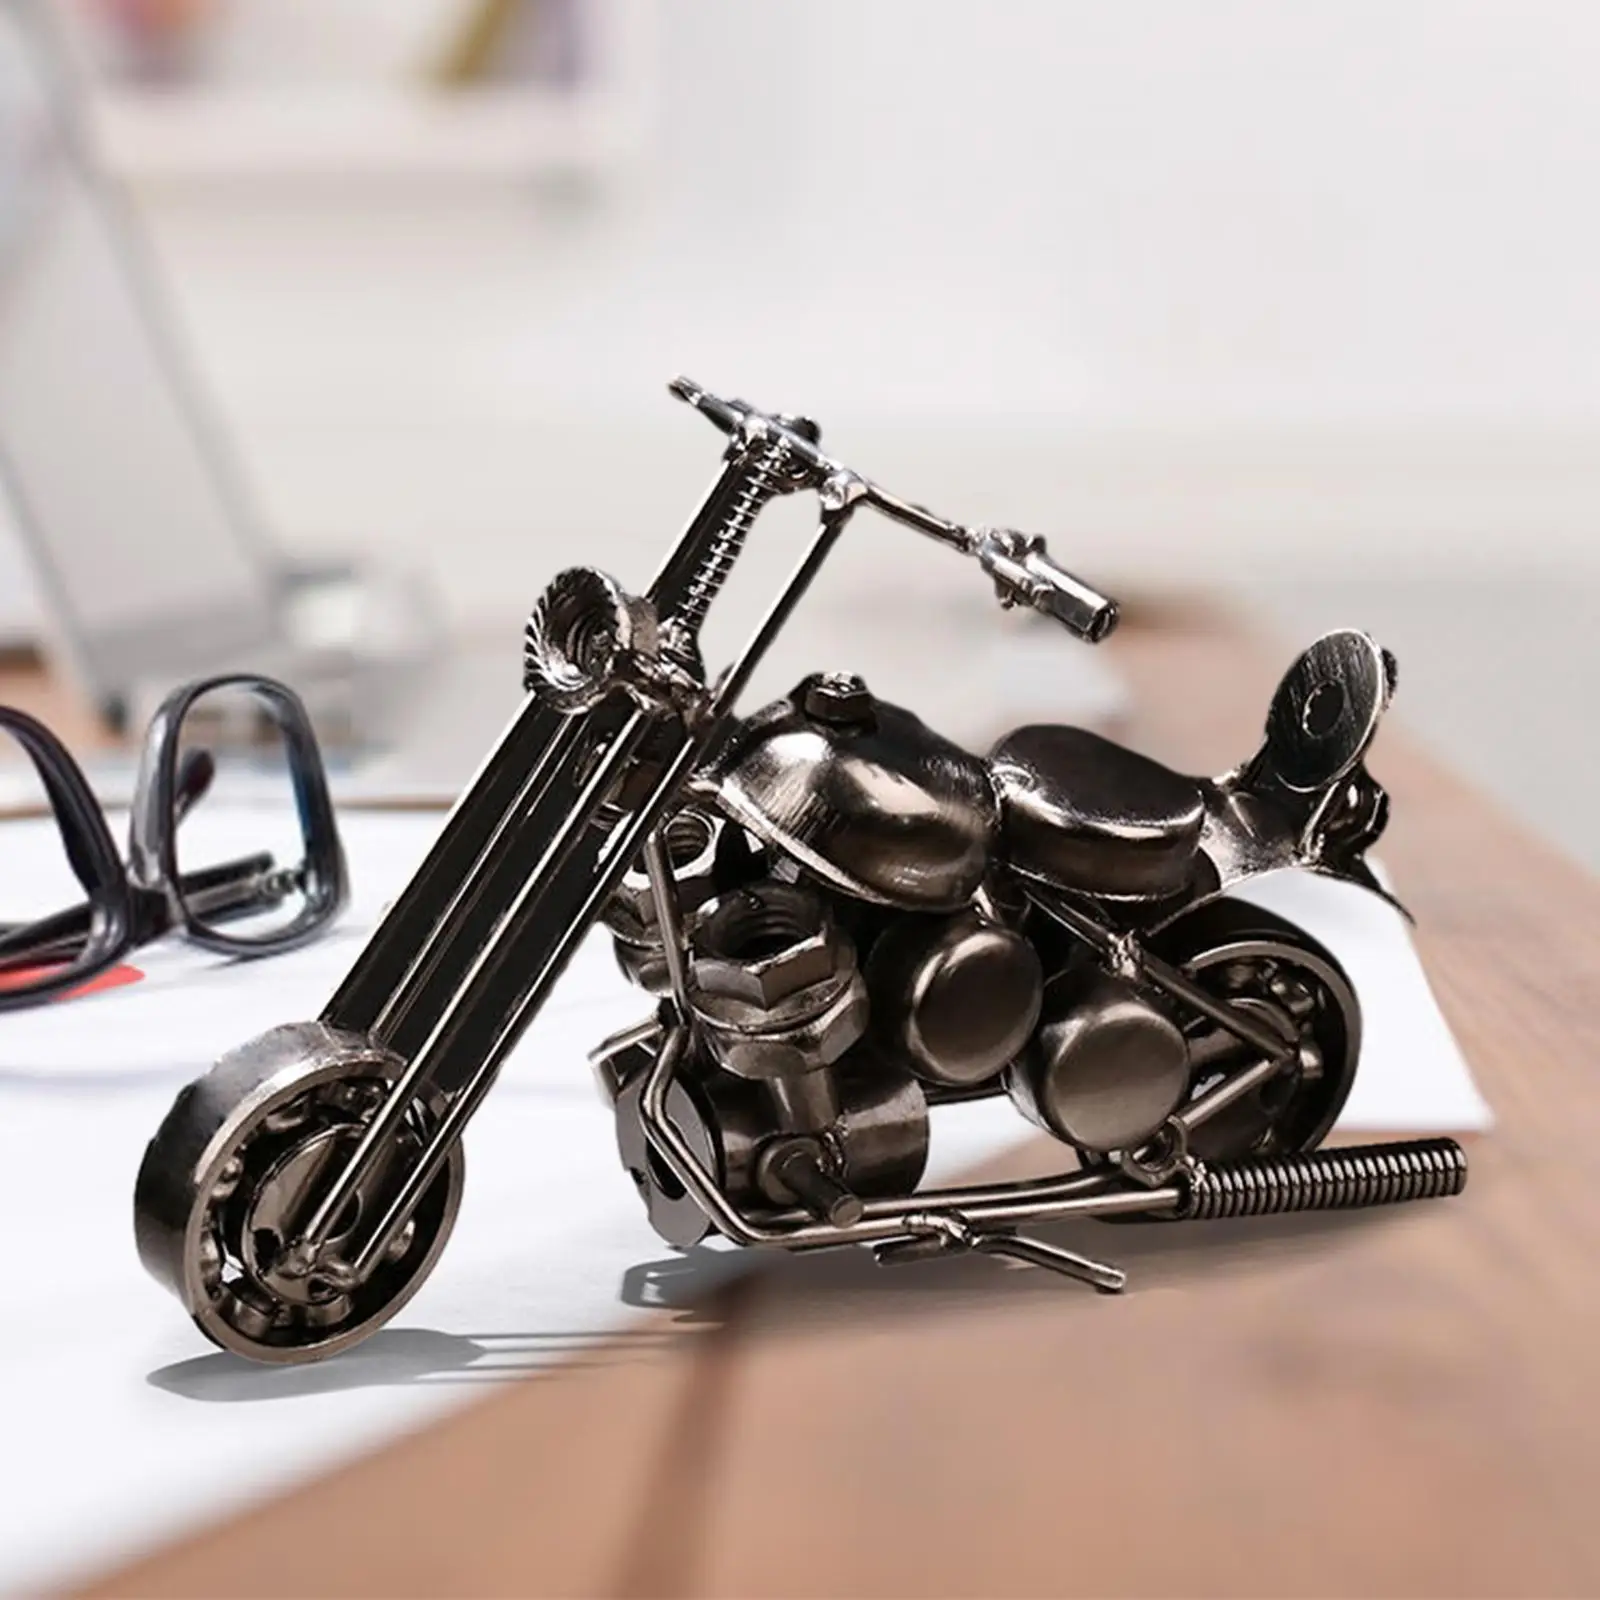 Motorcycle Model Motorcycle Sculpture Creative Figure Decoration Collectible for Bookshelf Home Desktop Motorcycle Lovers Son